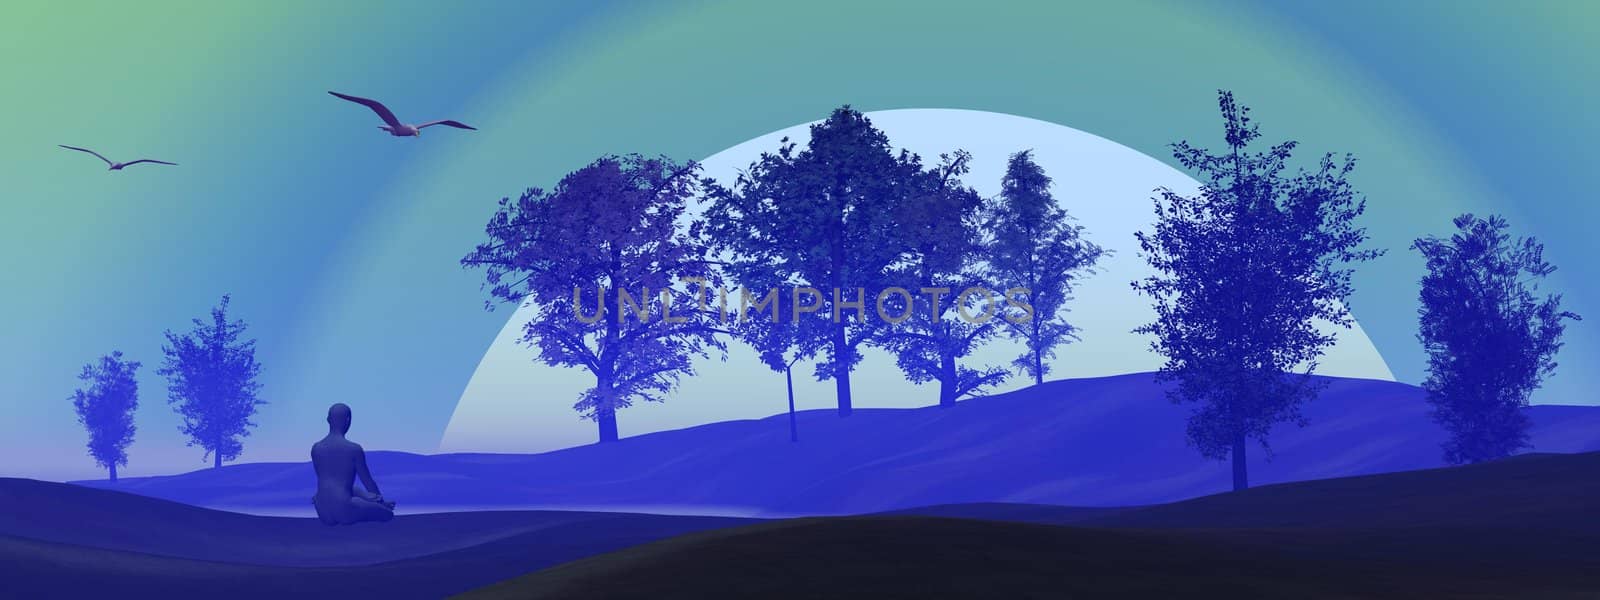 Human meditationg in blue background nature by sunset